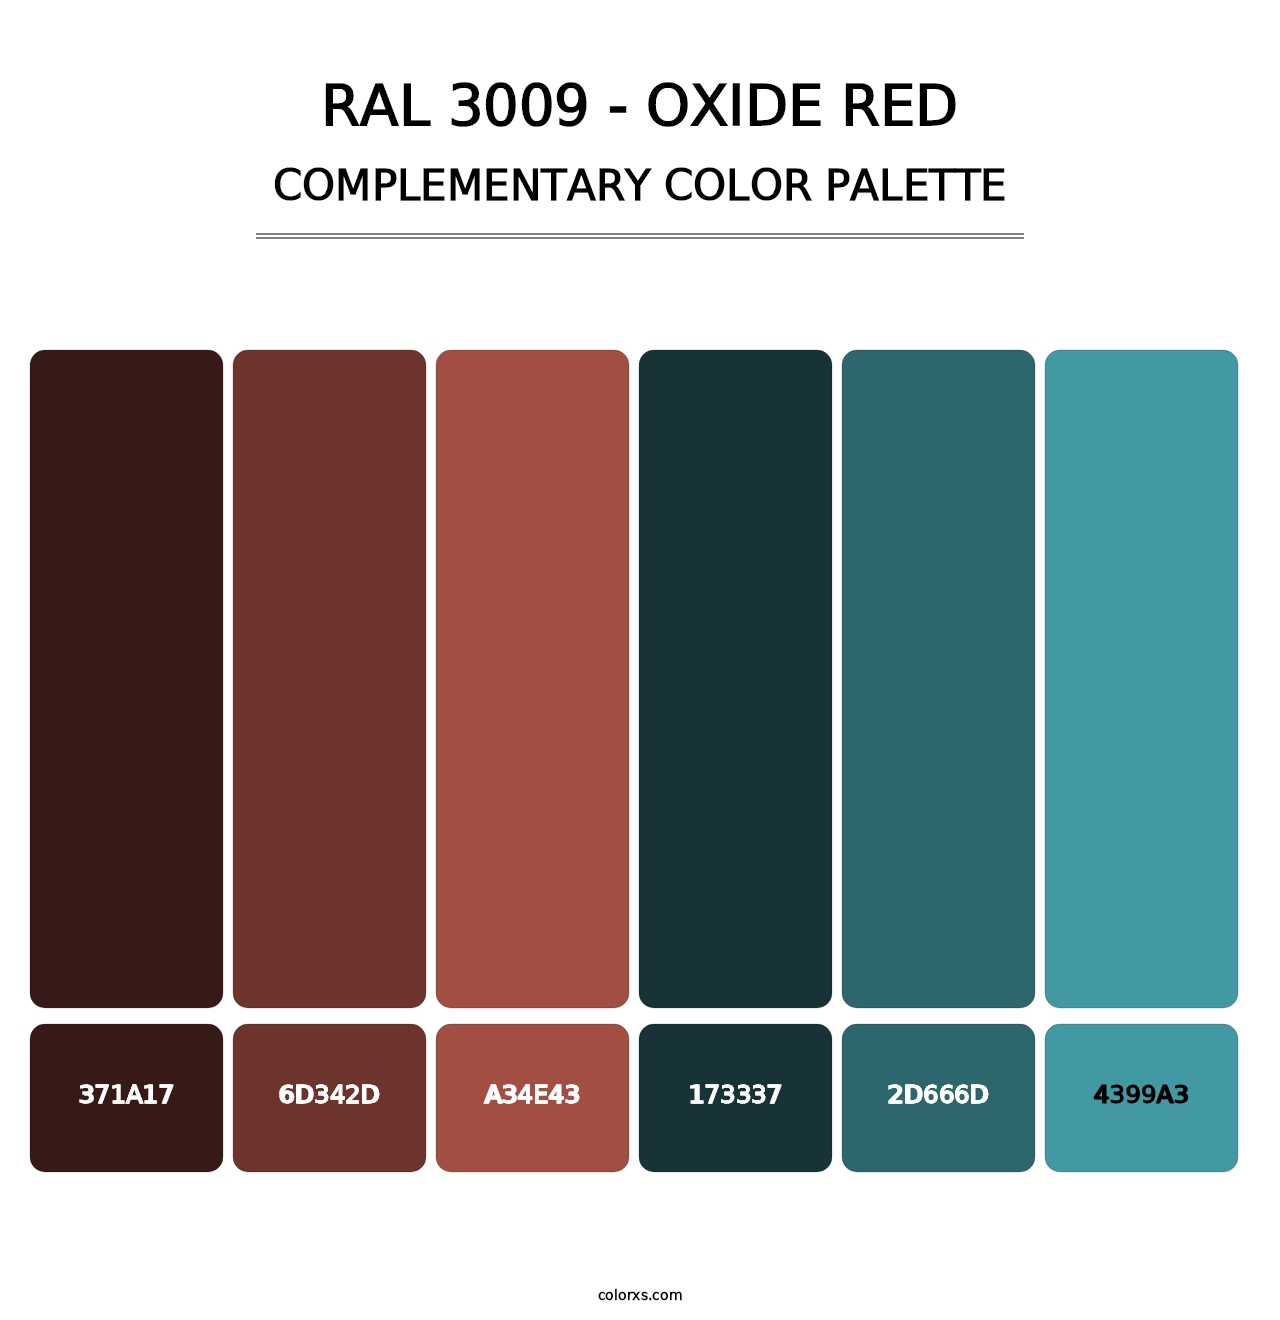 RAL 3009 - Oxide Red - Complementary Color Palette